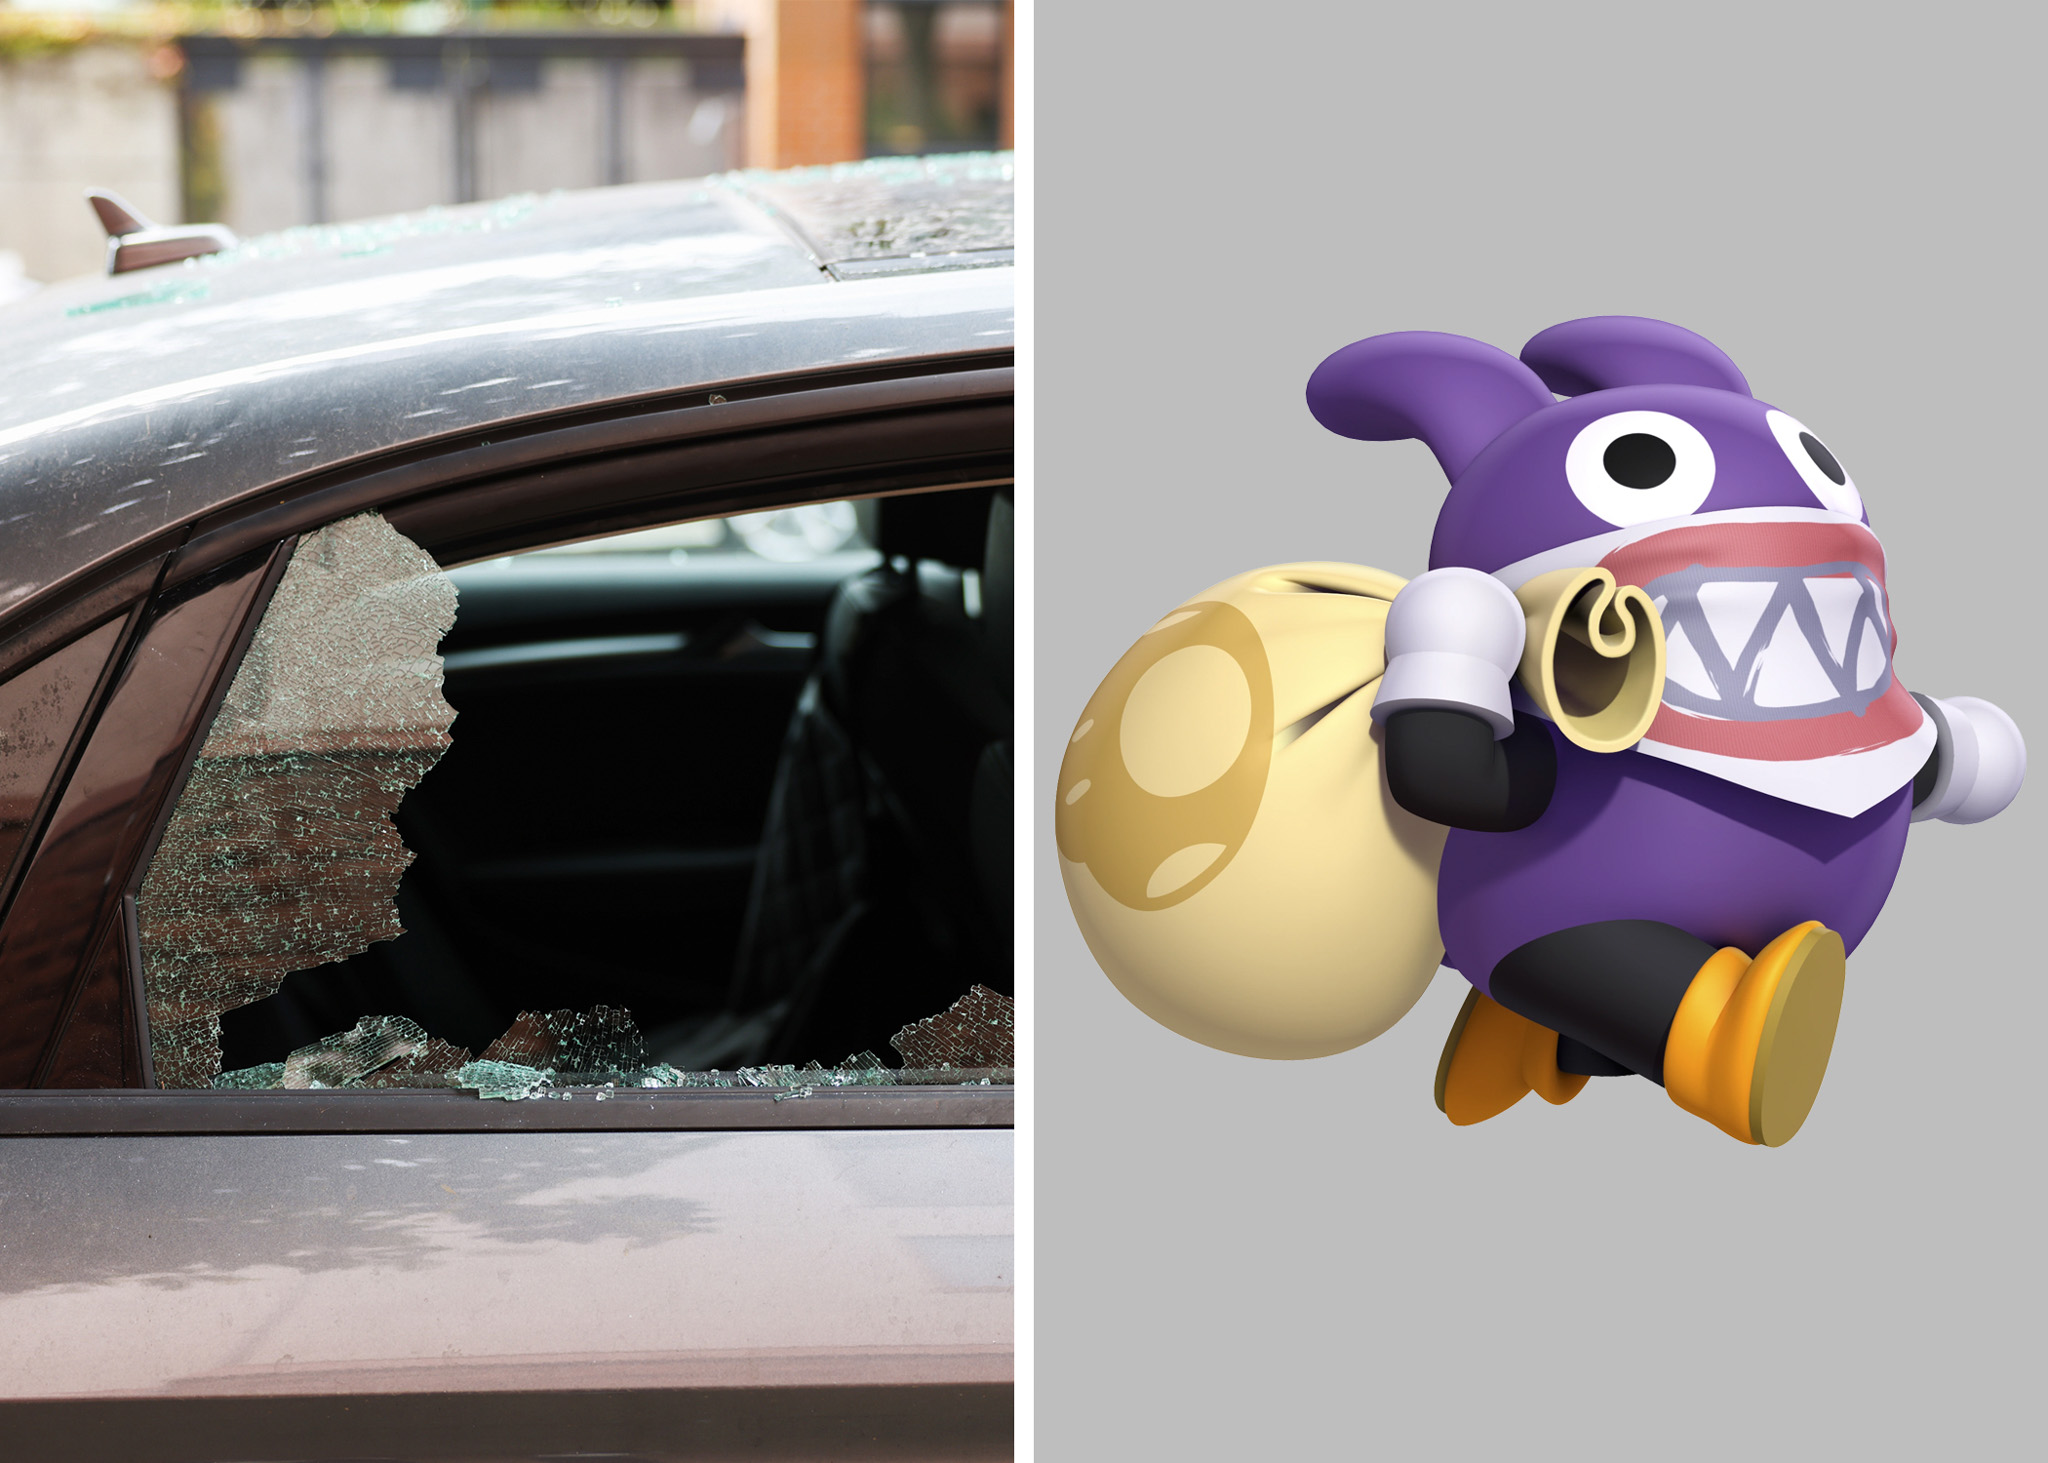 The image has two parts: on the left, a car's side window with shattered glass, and on the right, a cartoon character resembling a purple rabbit with a large yellow sack.